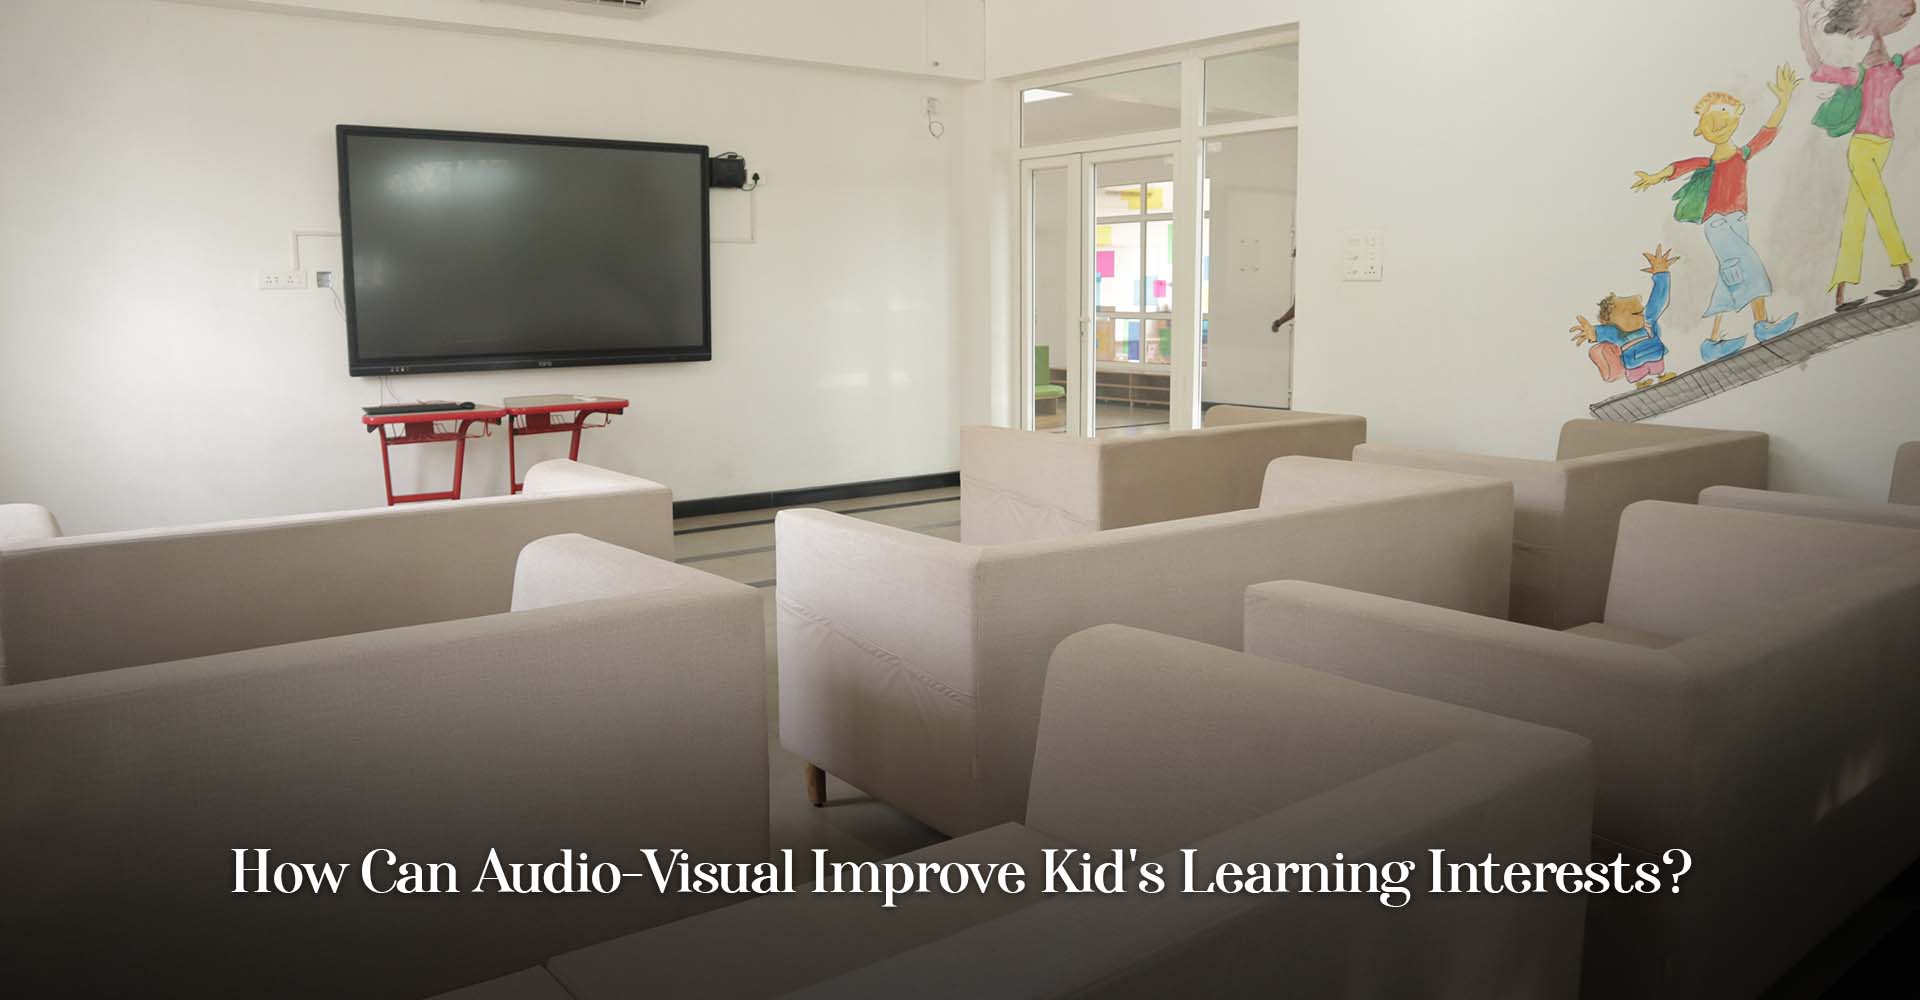 How Can Audio-Visual Improve Kid’s Learning Interests?